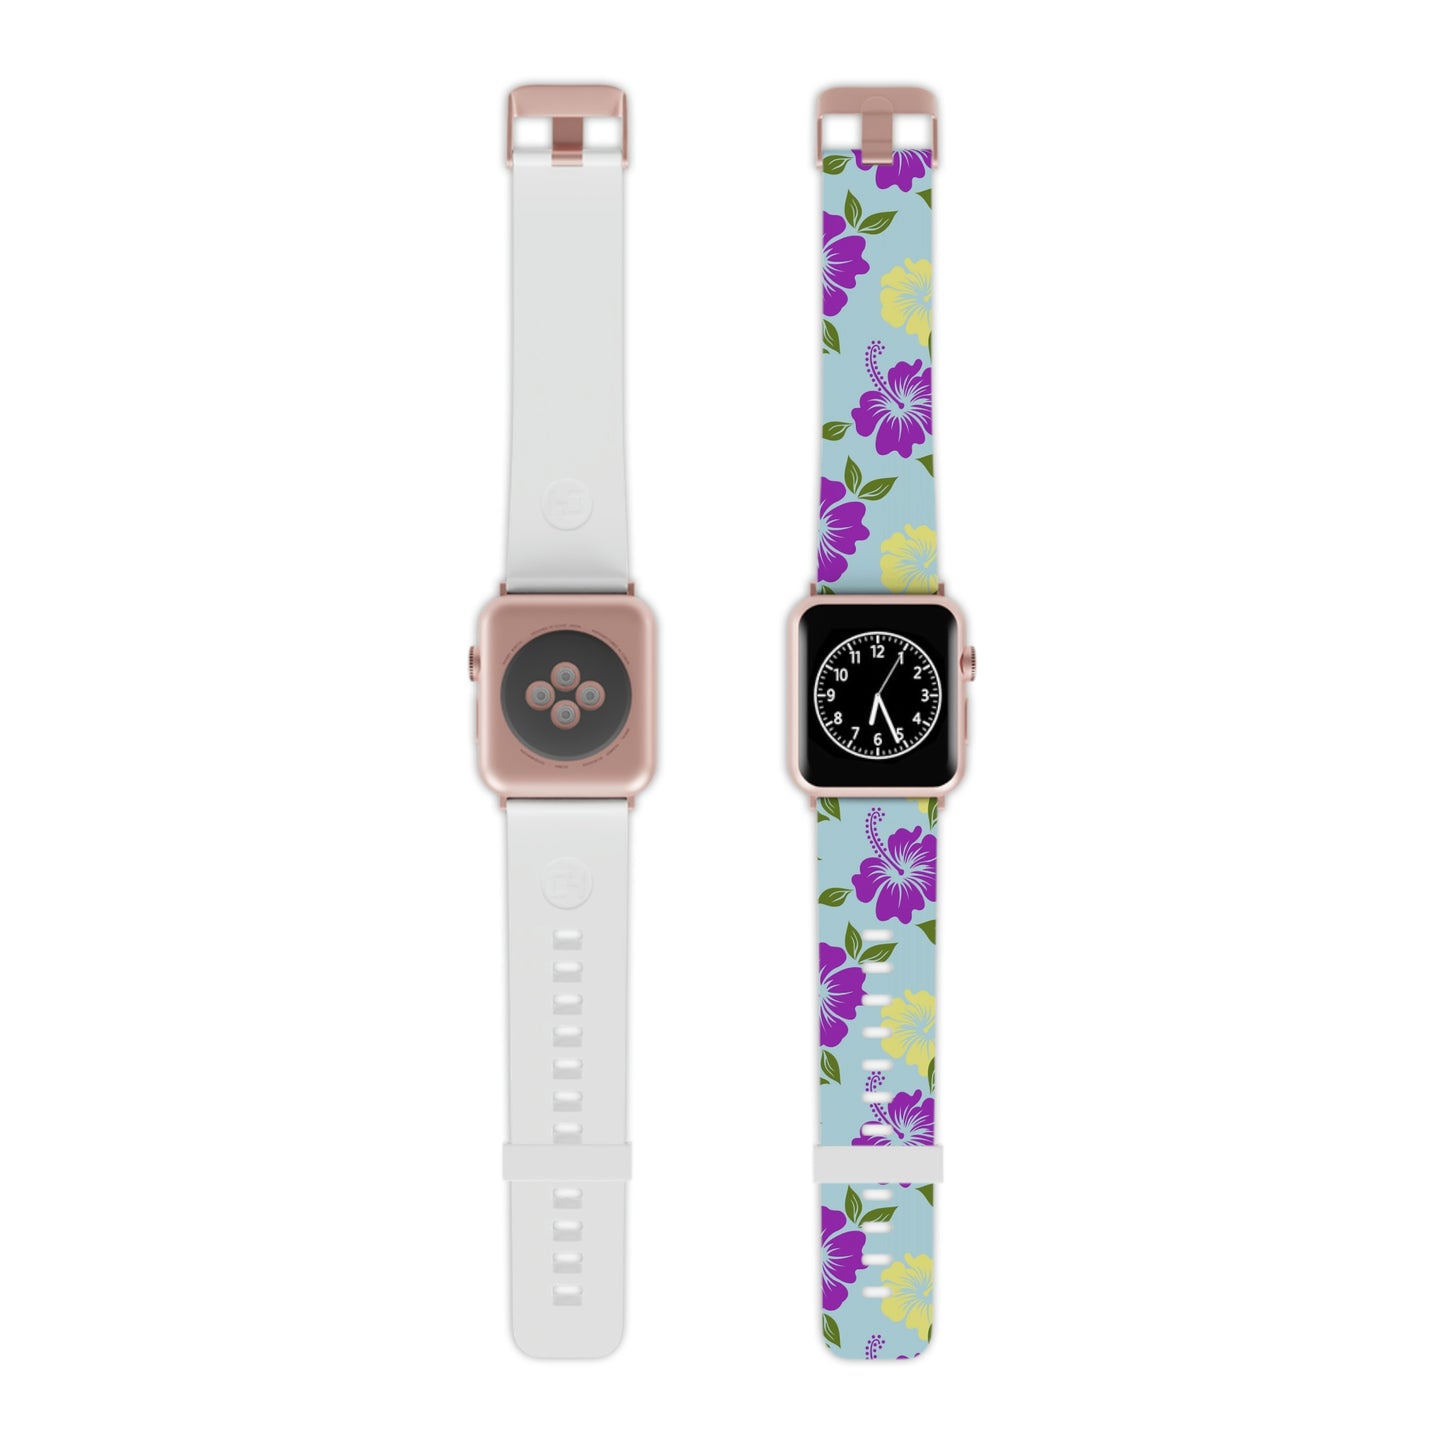 Blue Tropical Thermo Elastomer Print Watch Band for Apple Watch